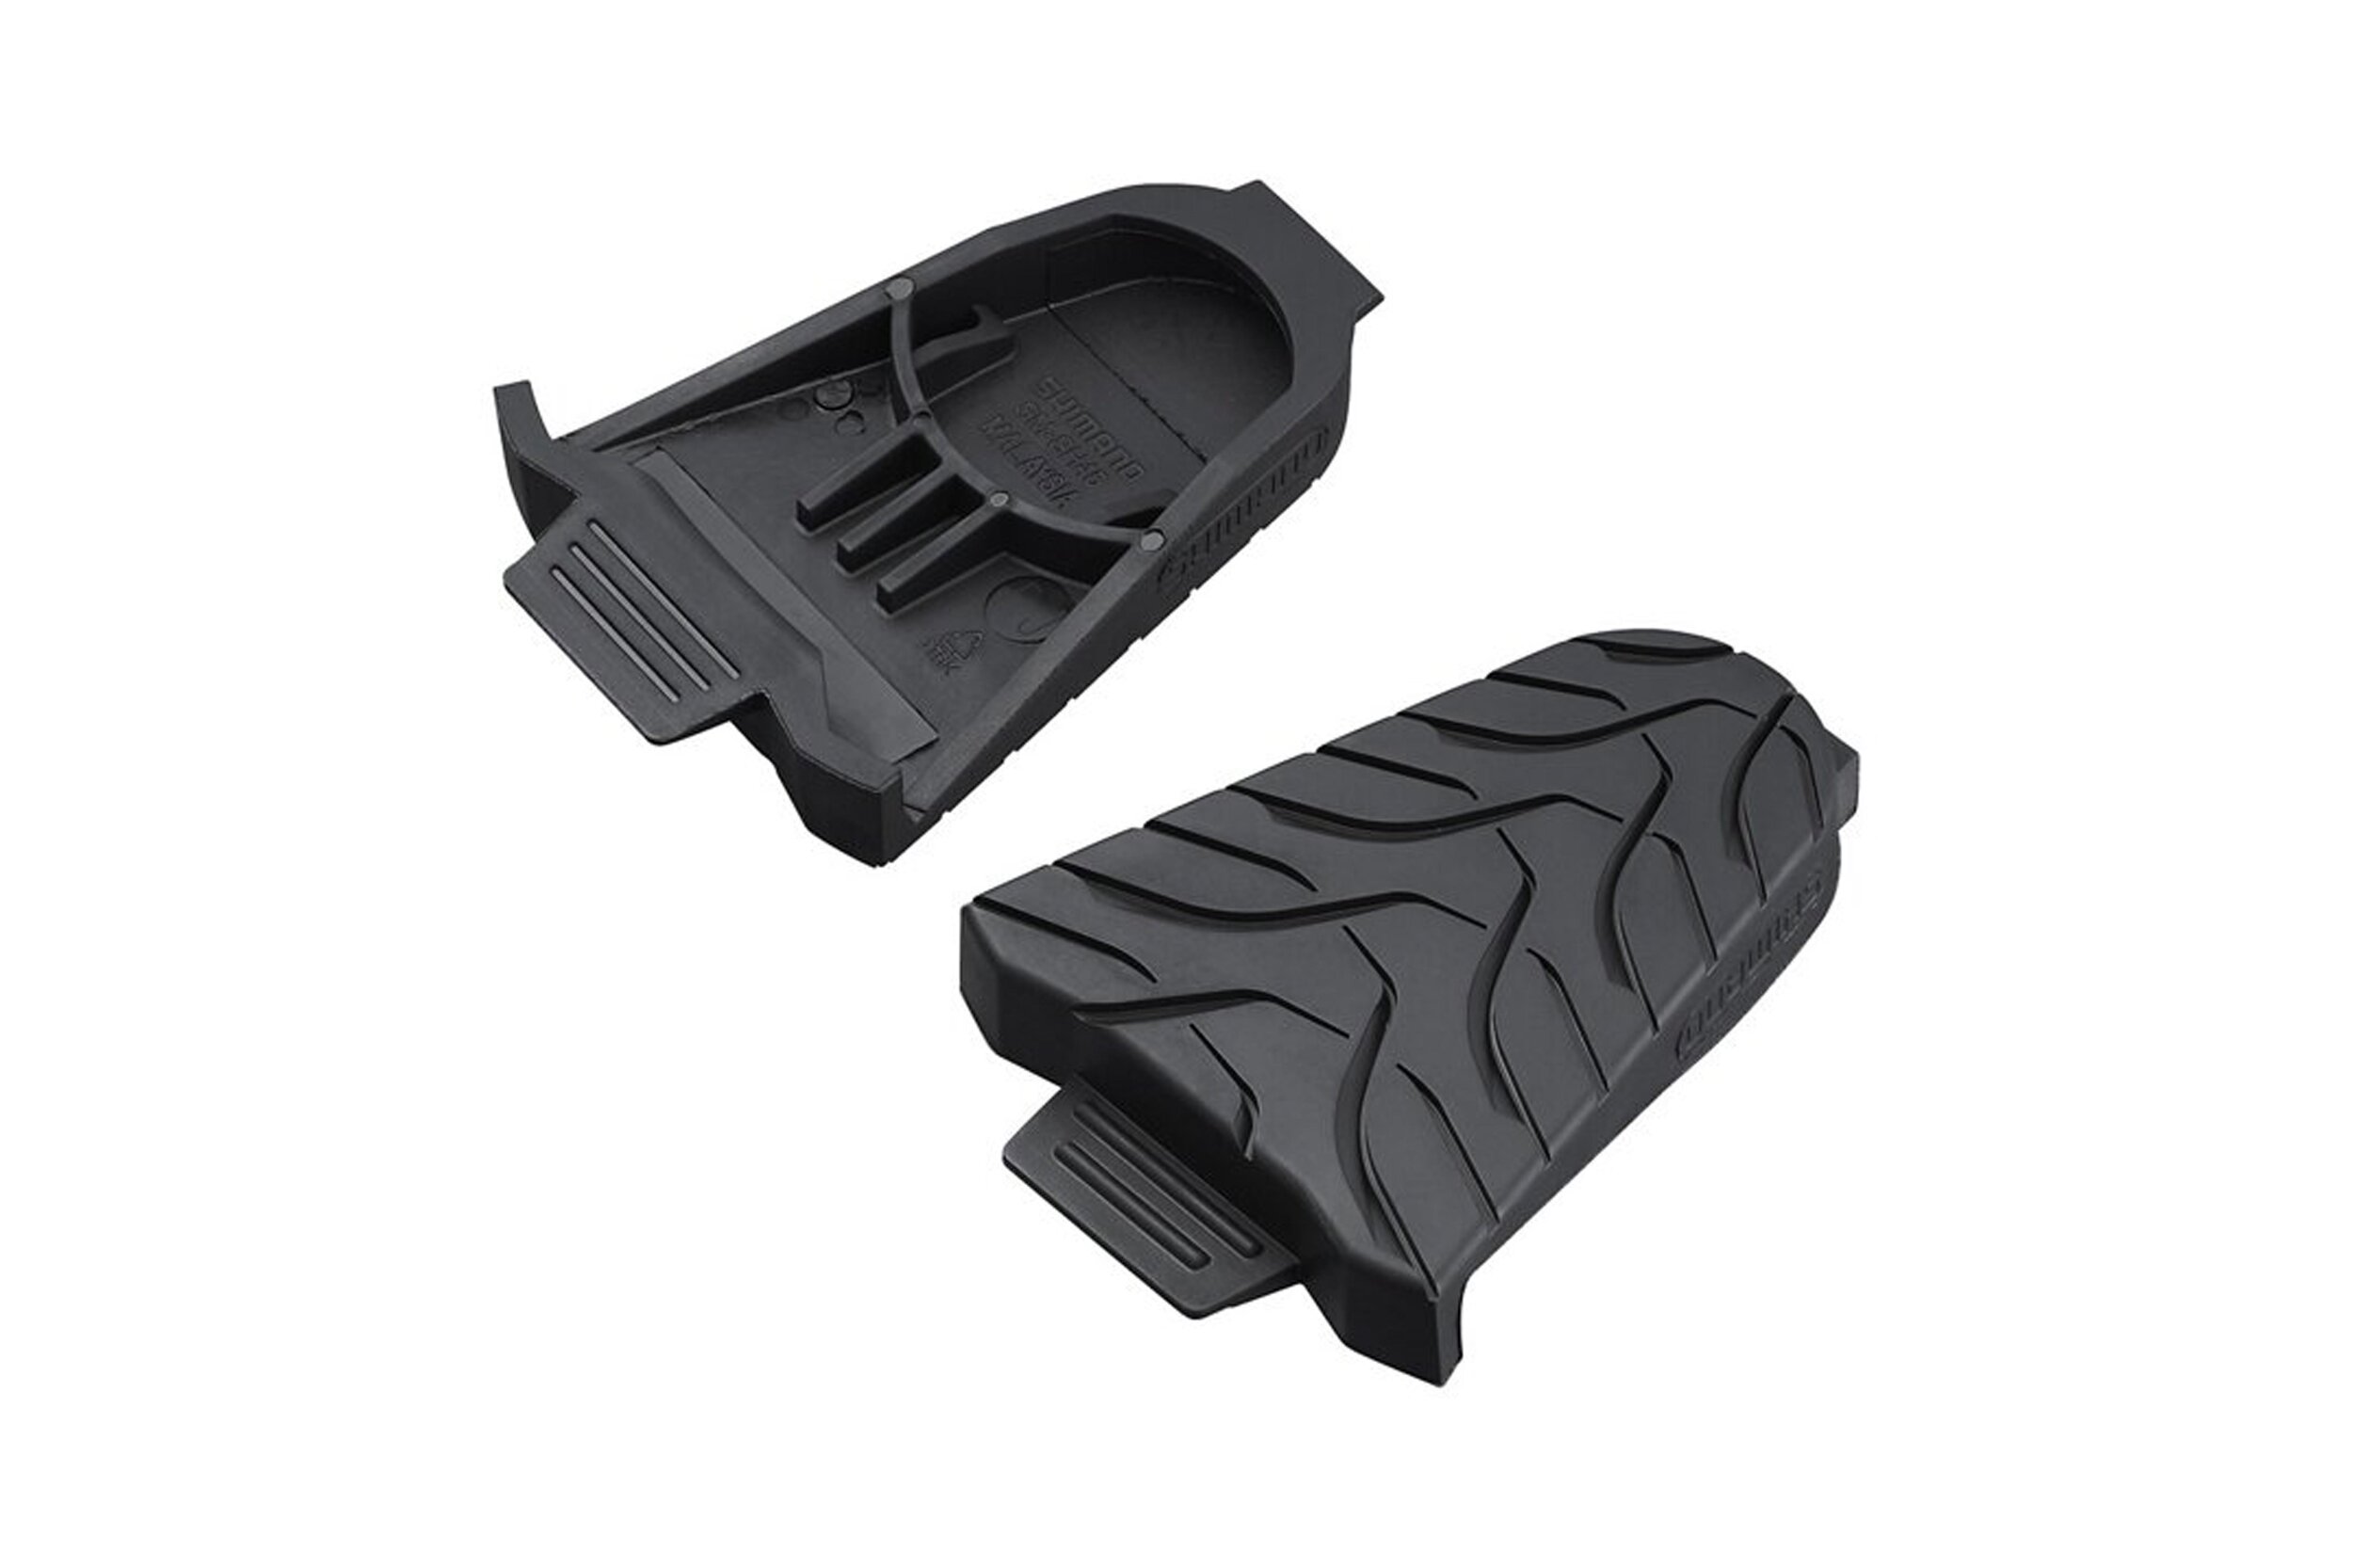 SHIMANO SM-SH45 CLEAT COVERS SHOE COVER MOUNTAIN ROAD BIKE SPD-SL PEDALS GENUINE